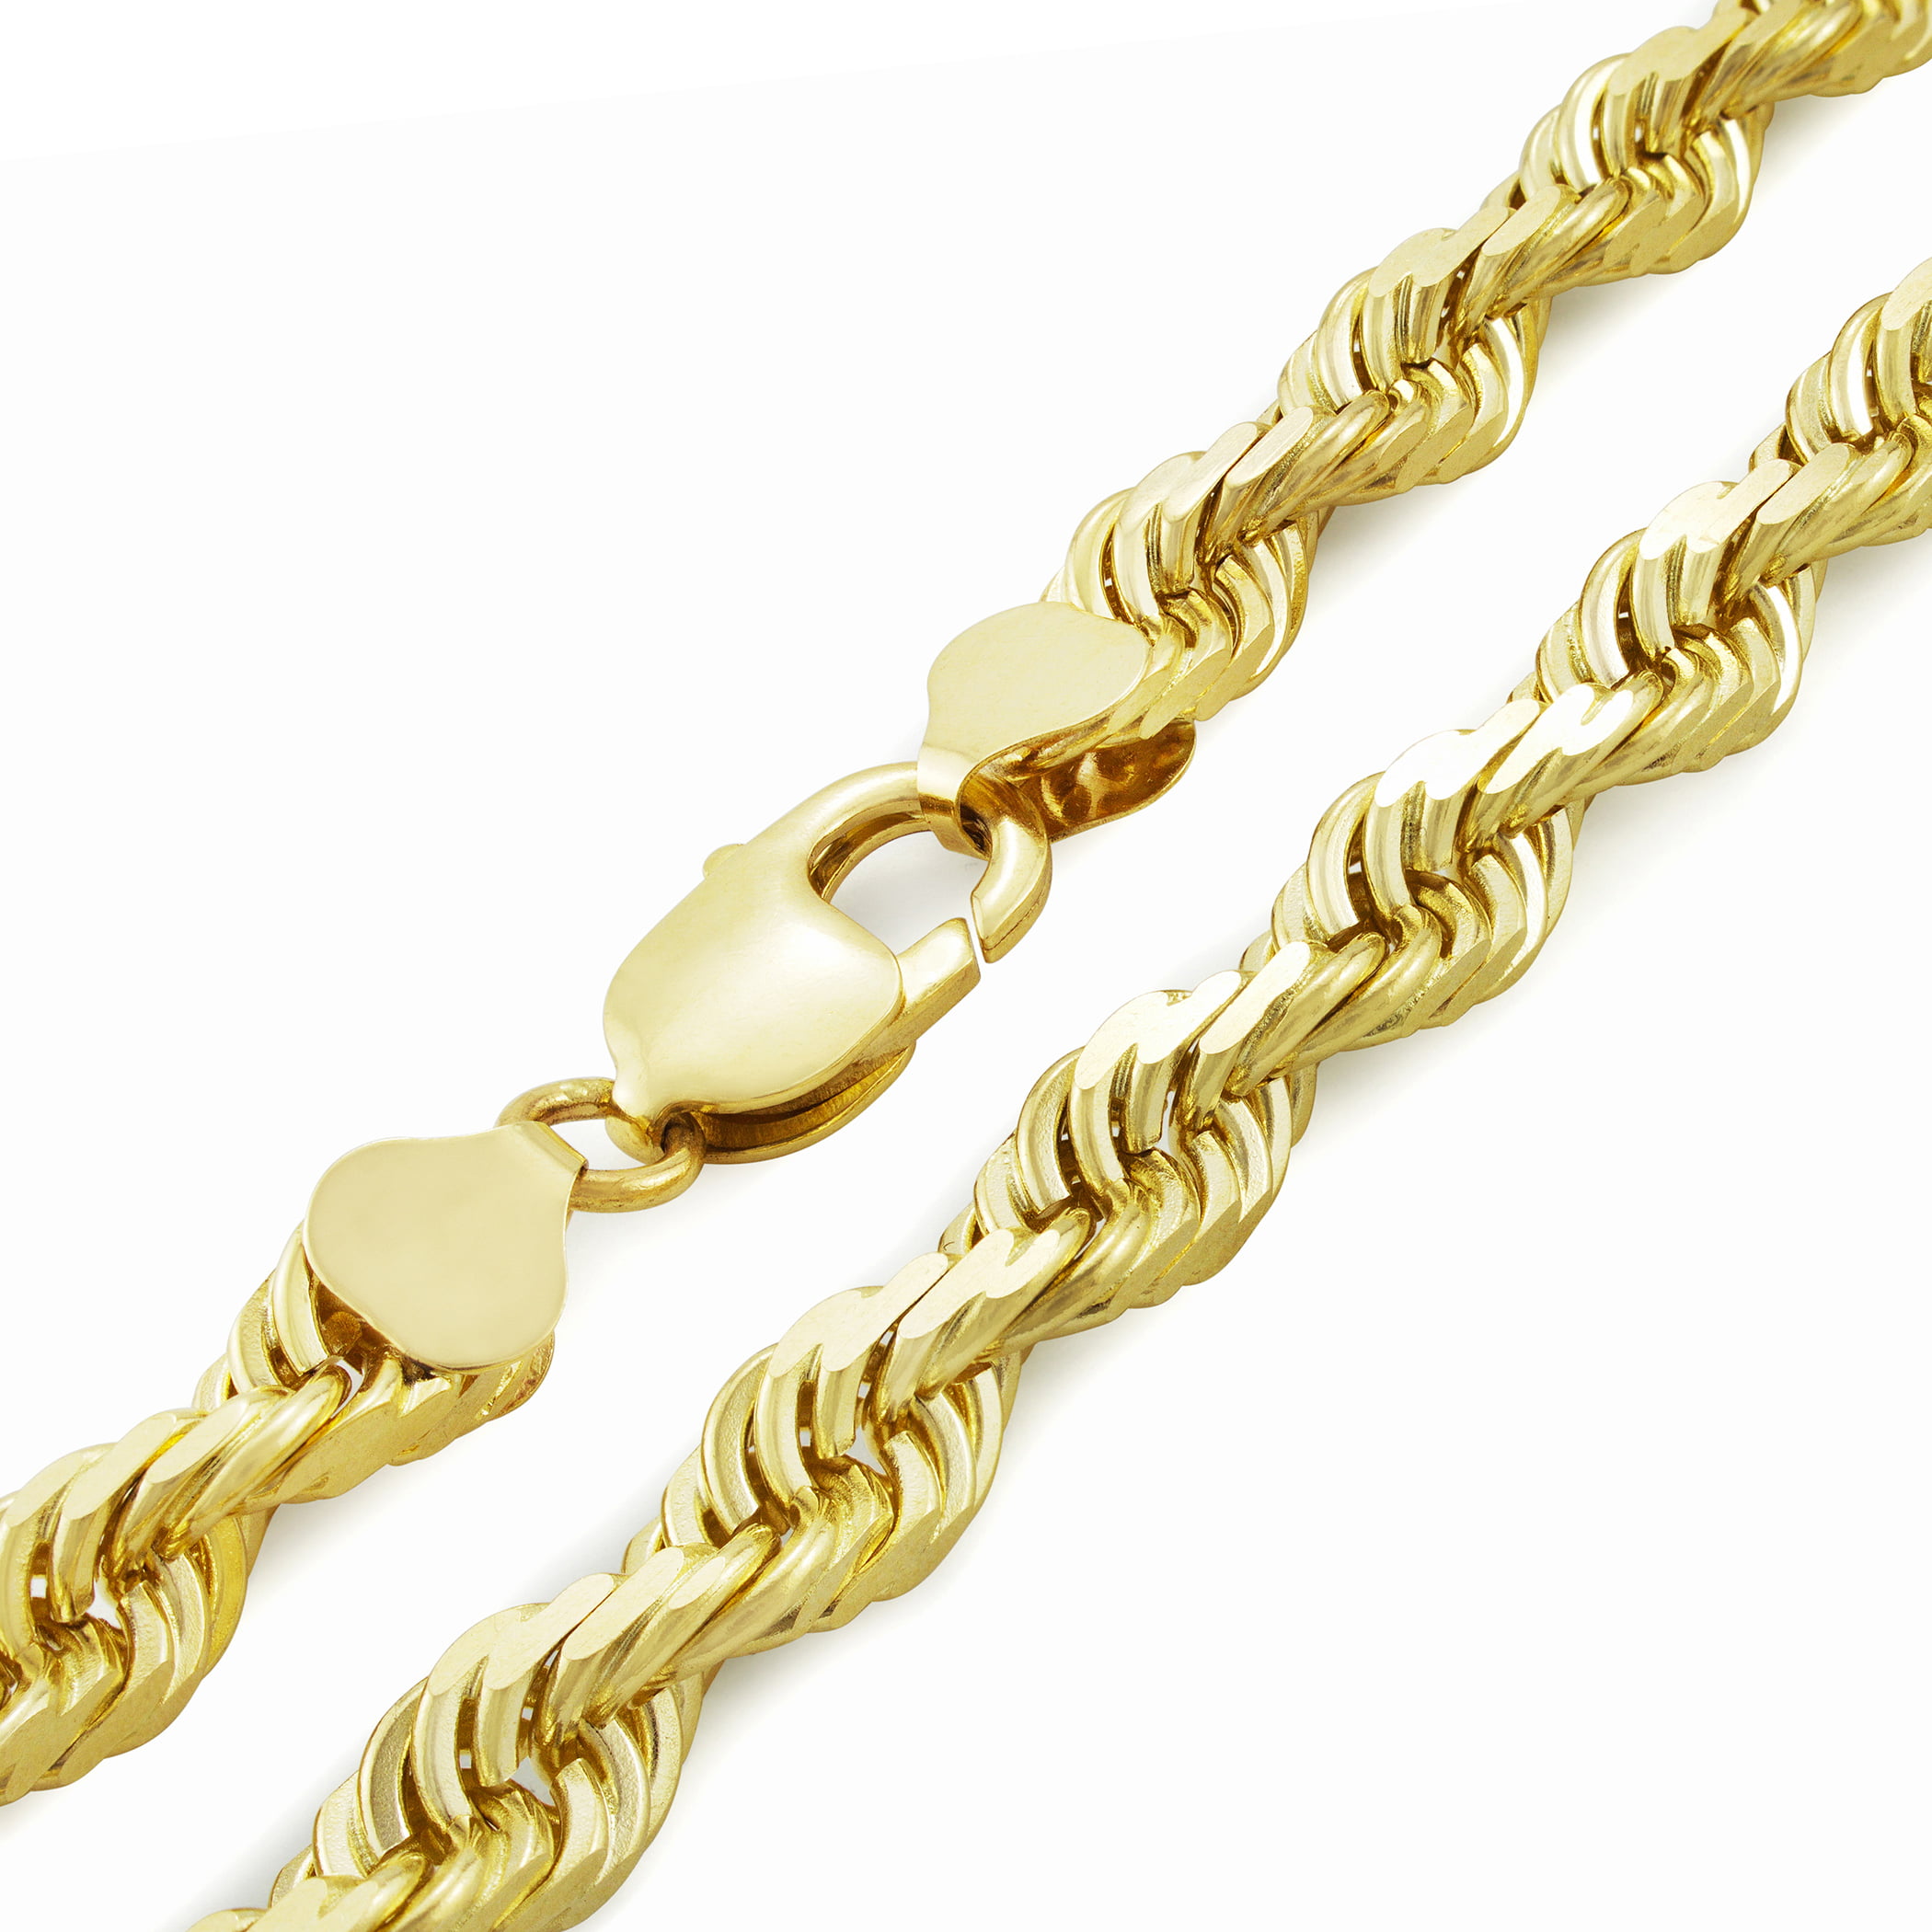 Men's 14k Yellow Gold Solid 8mm Diamond Cut Rope Chain Necklace, 24